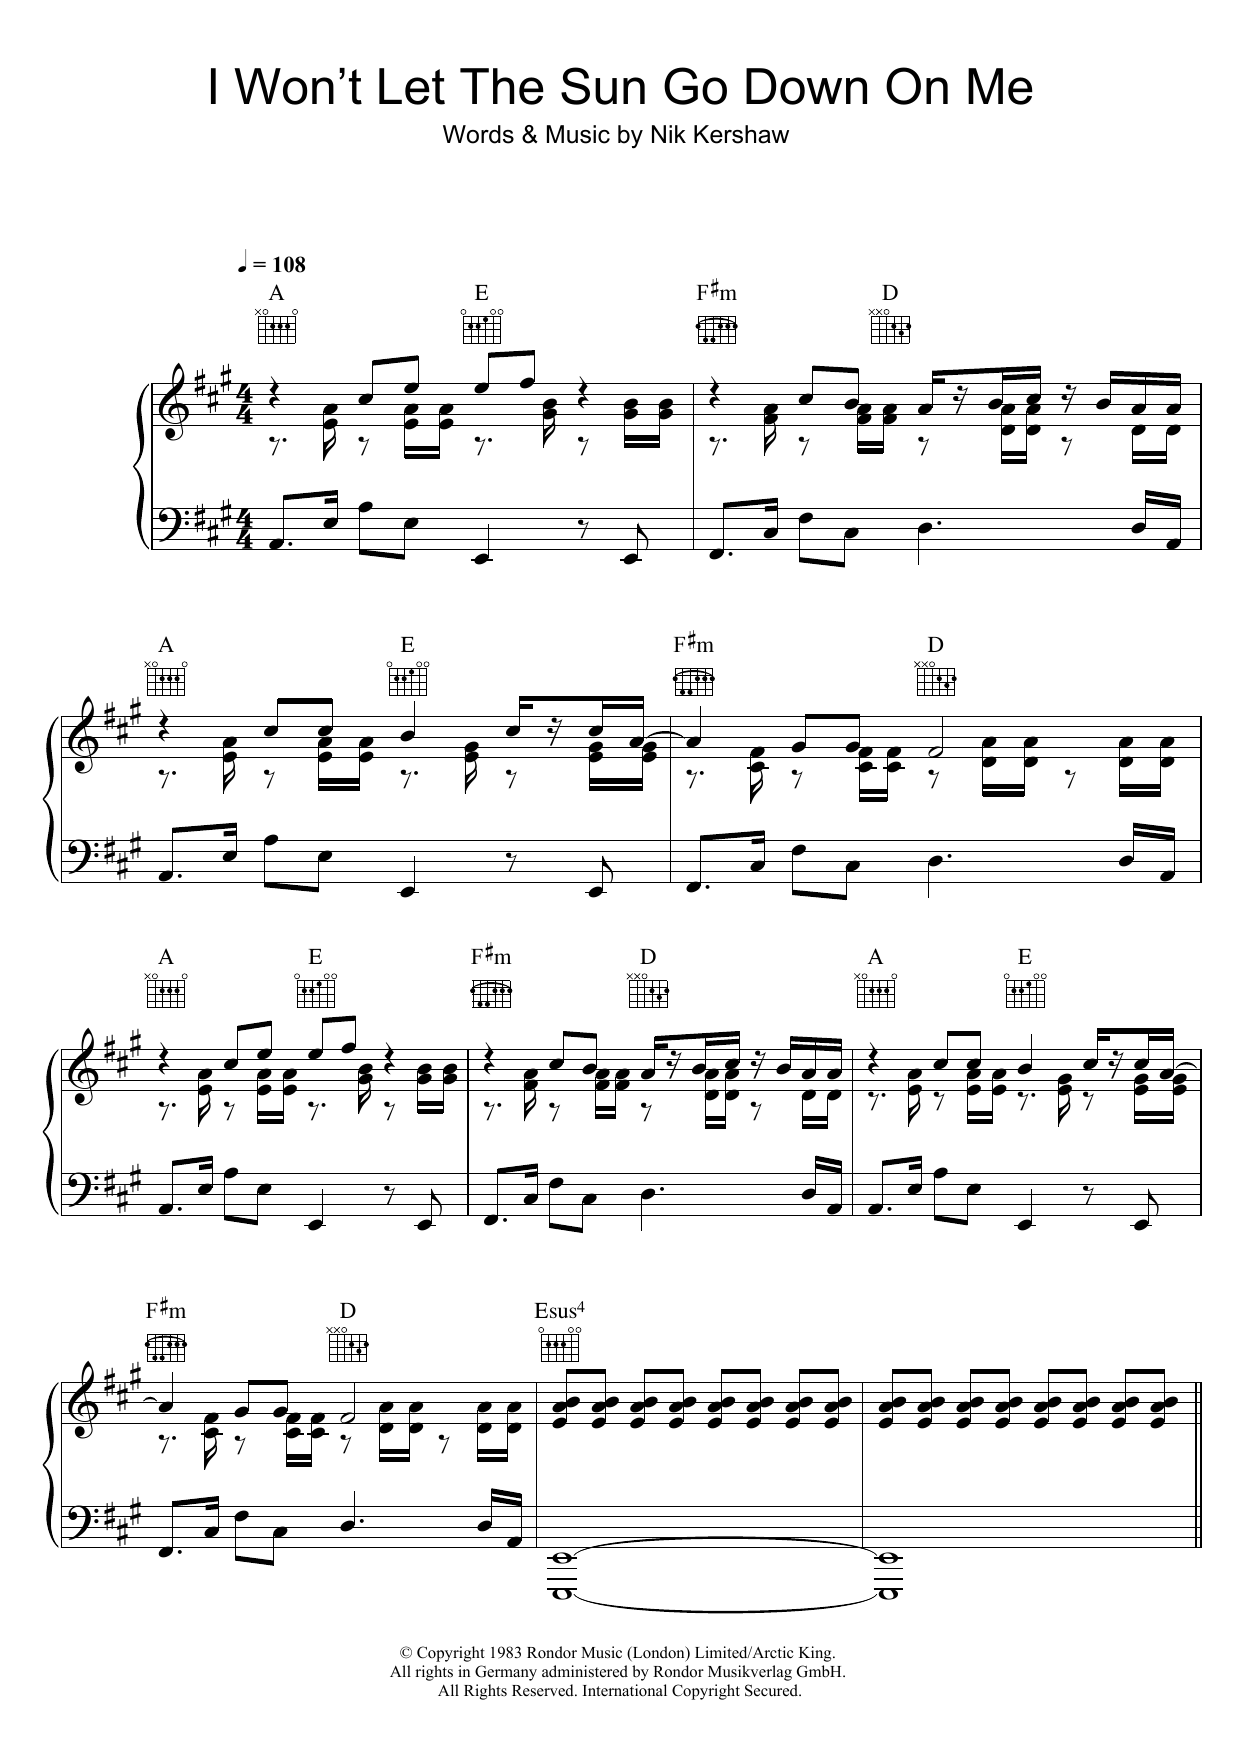 Nik Kershaw I Won't Let The Sun Go Down On Me sheet music notes and chords. Download Printable PDF.